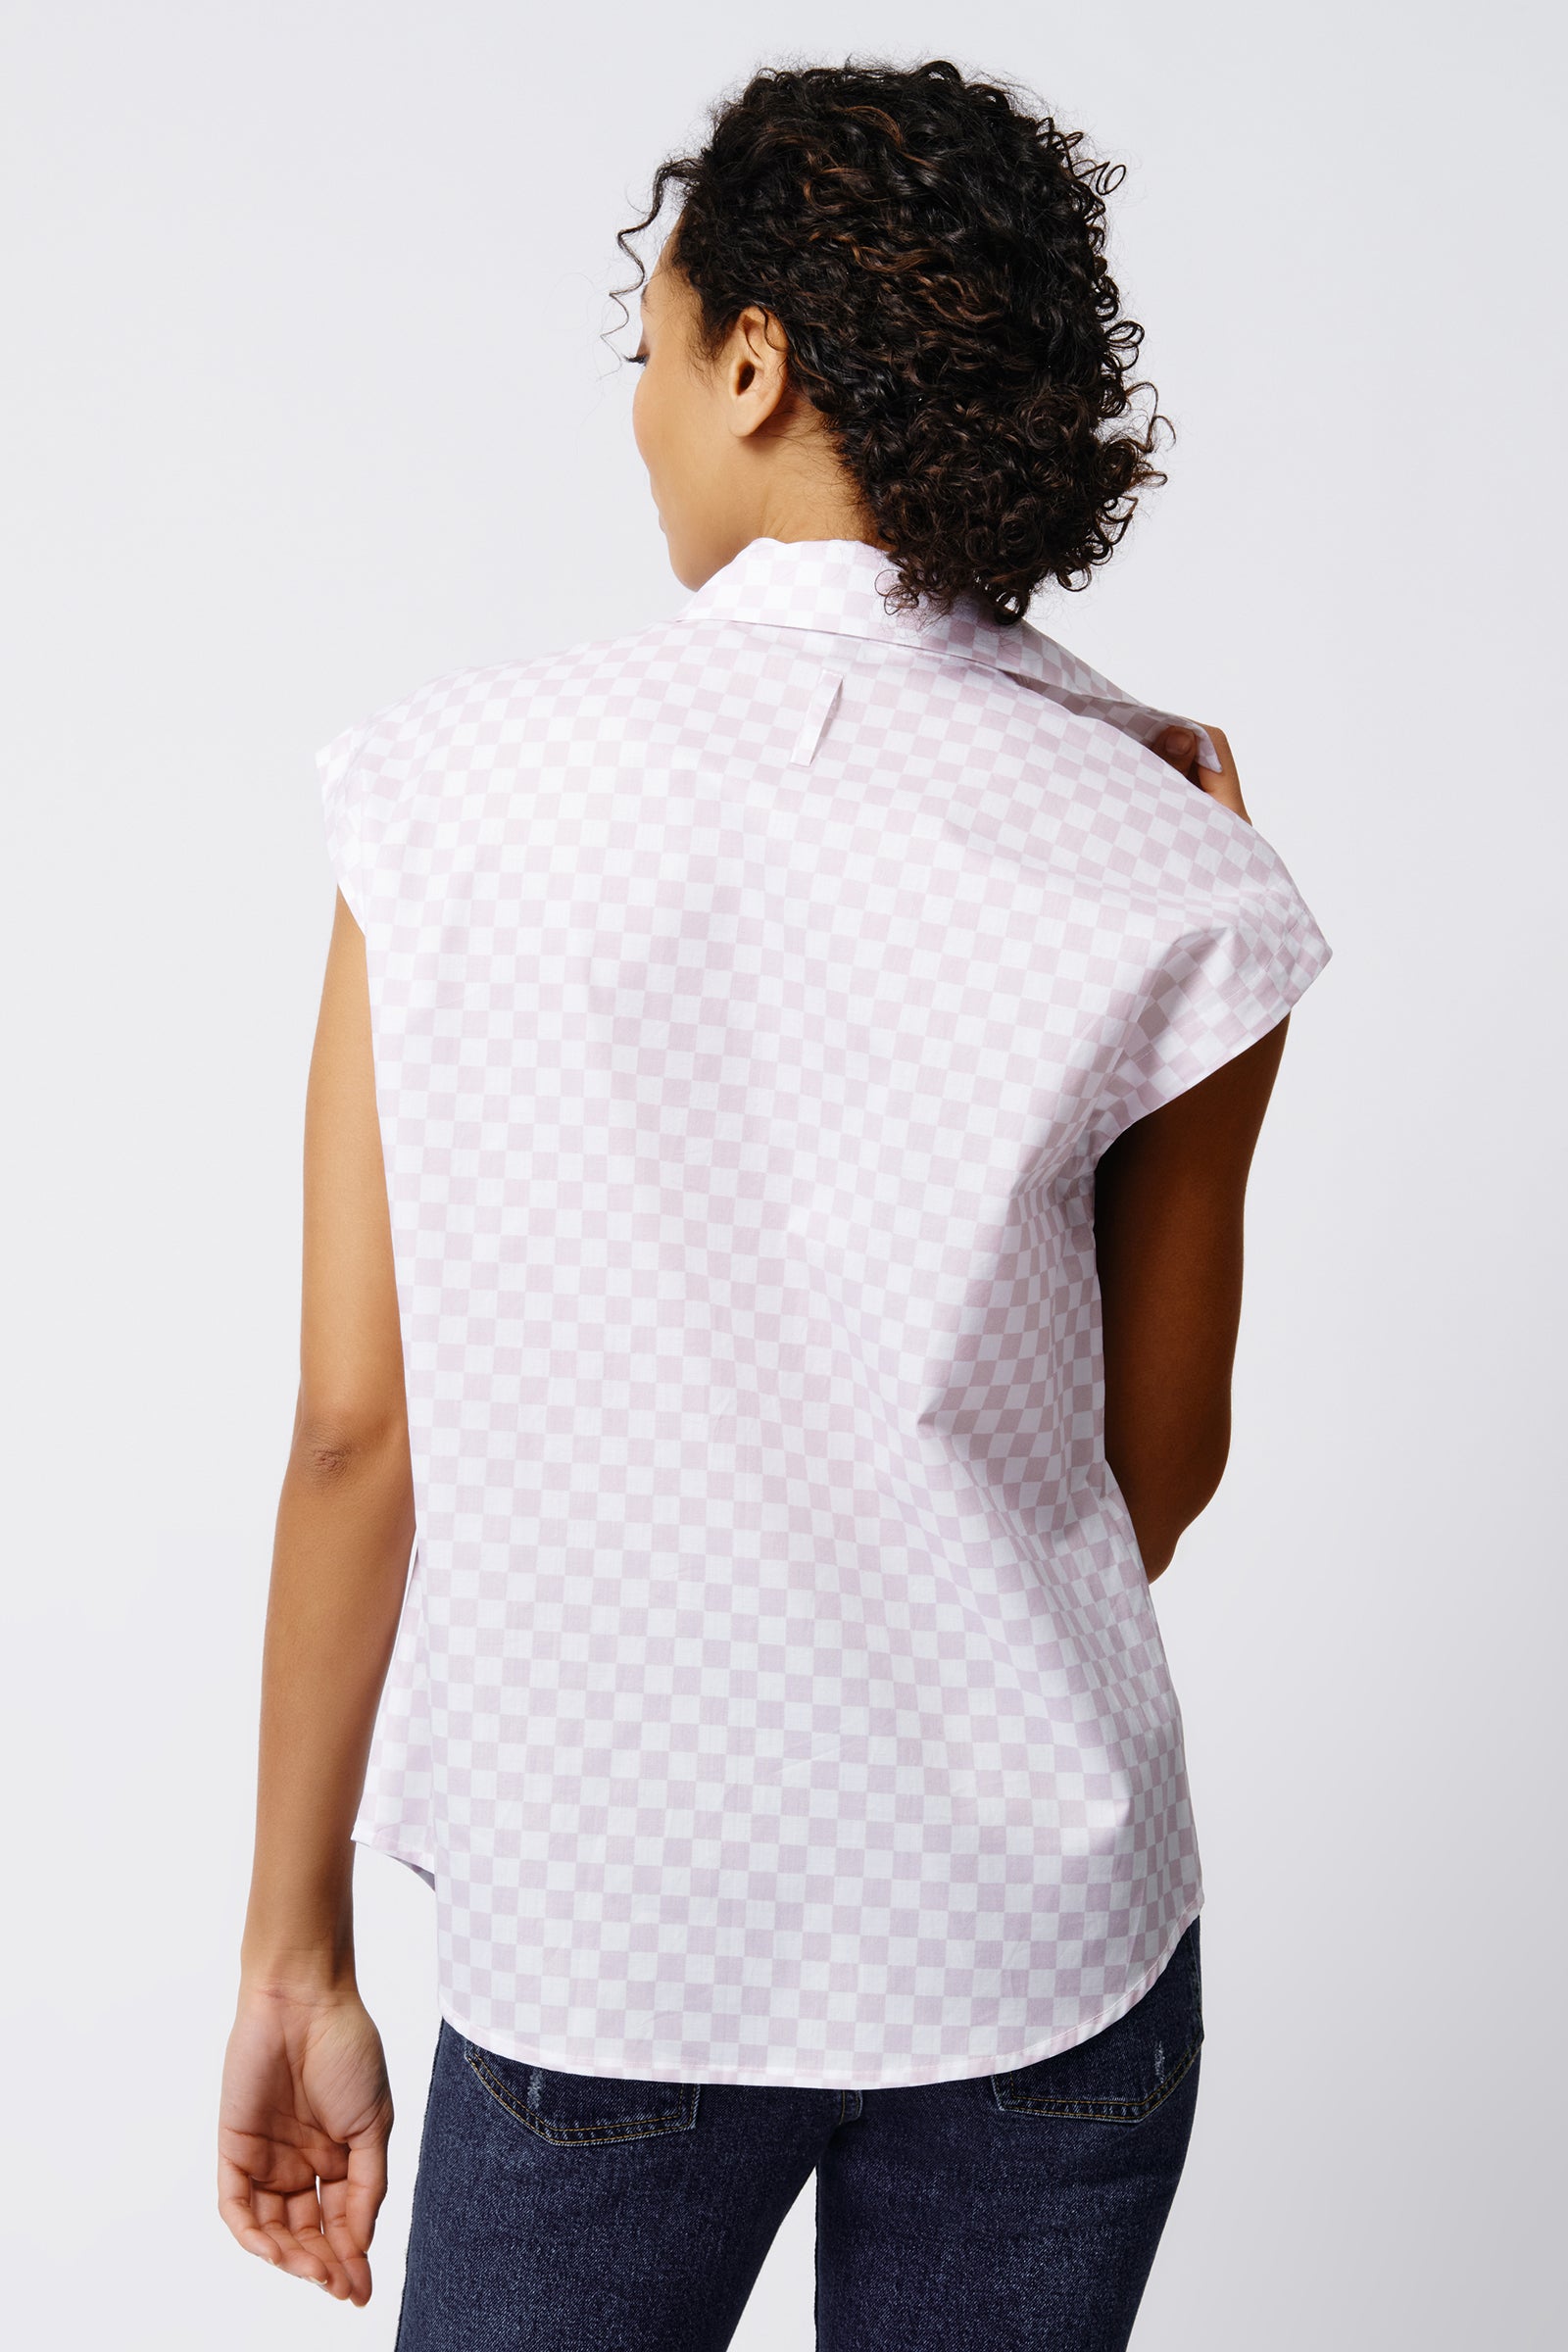 Kal Rieman Cap Sleeve Shirt in Lavender Checkerboard on Model Front View Crop 3